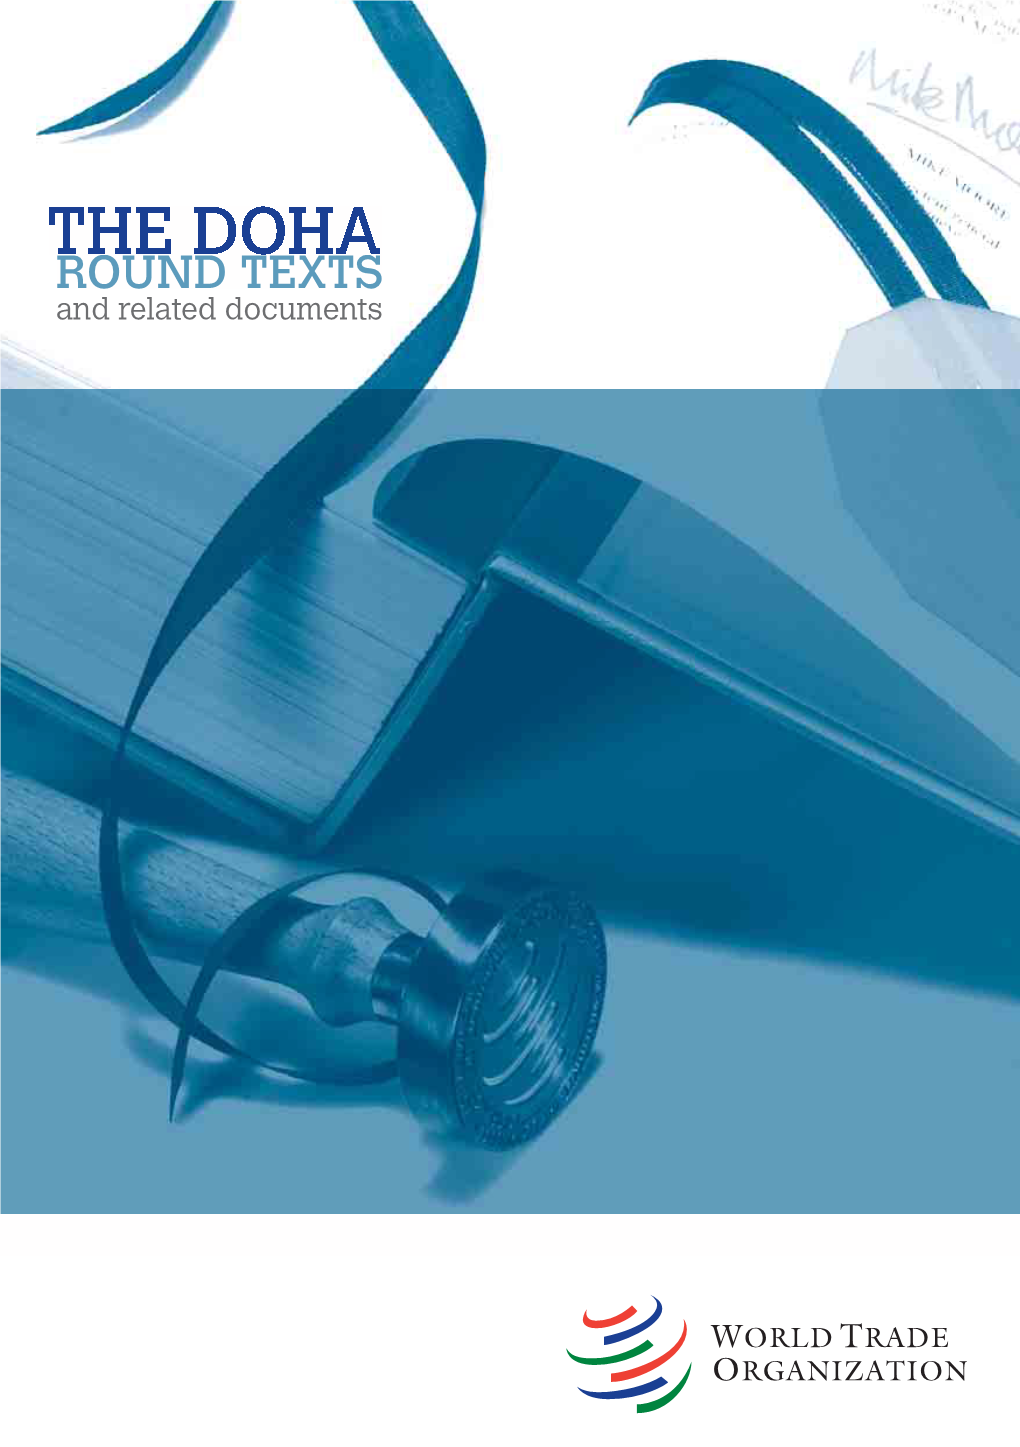 Doha Round Texts and Related Documents